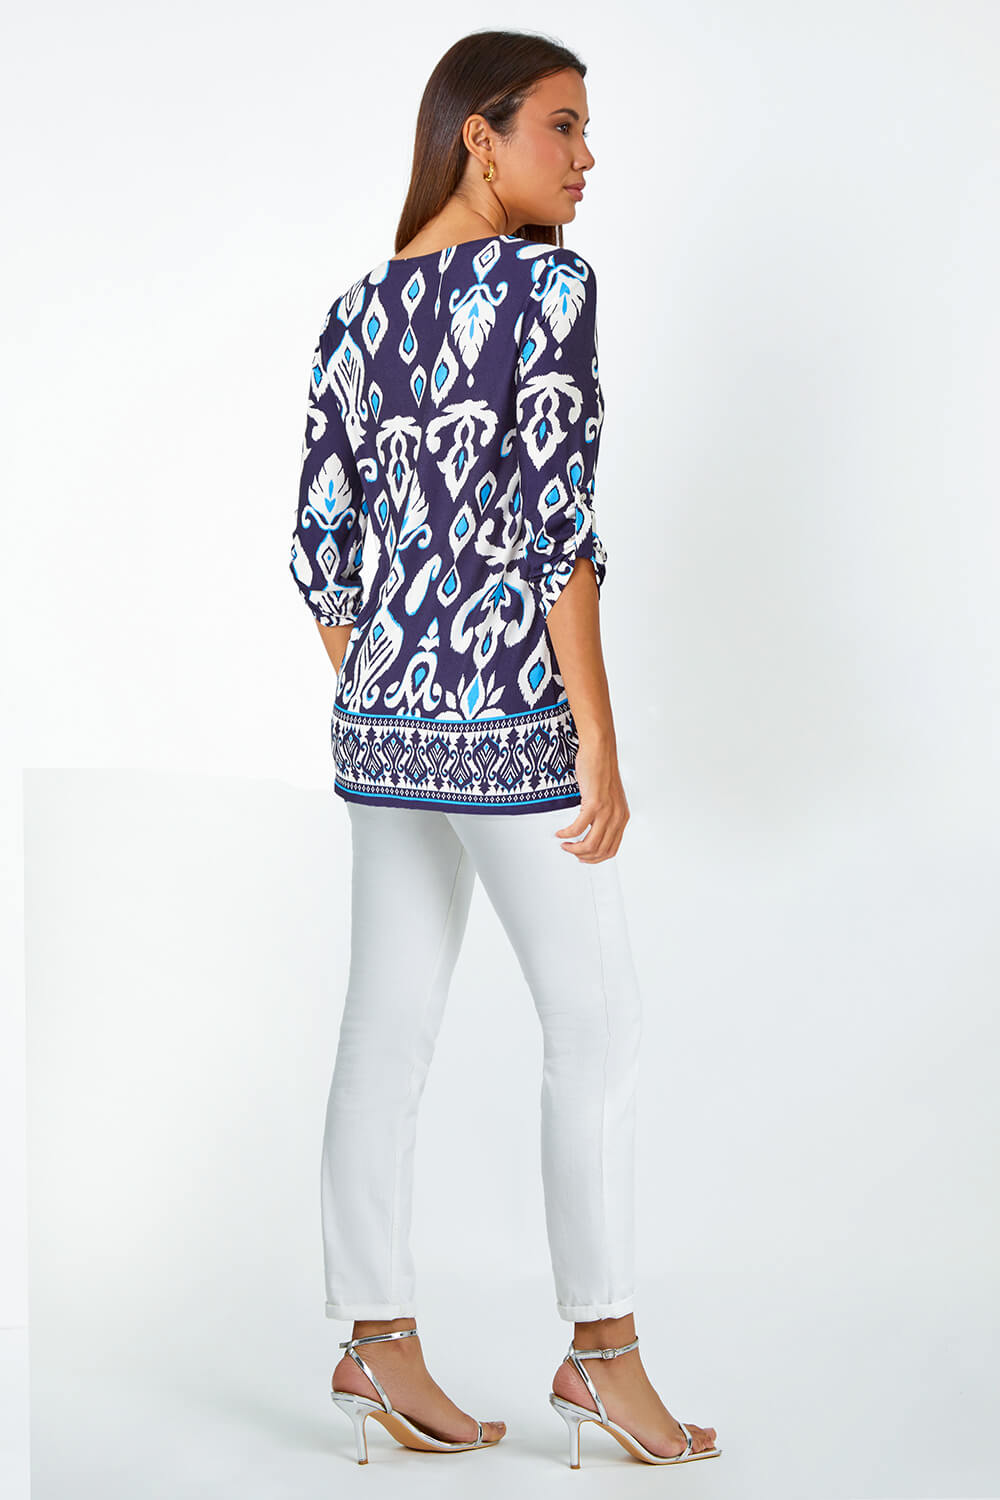 Blue Border Print Stretch Jersey Top, Image 3 of 5